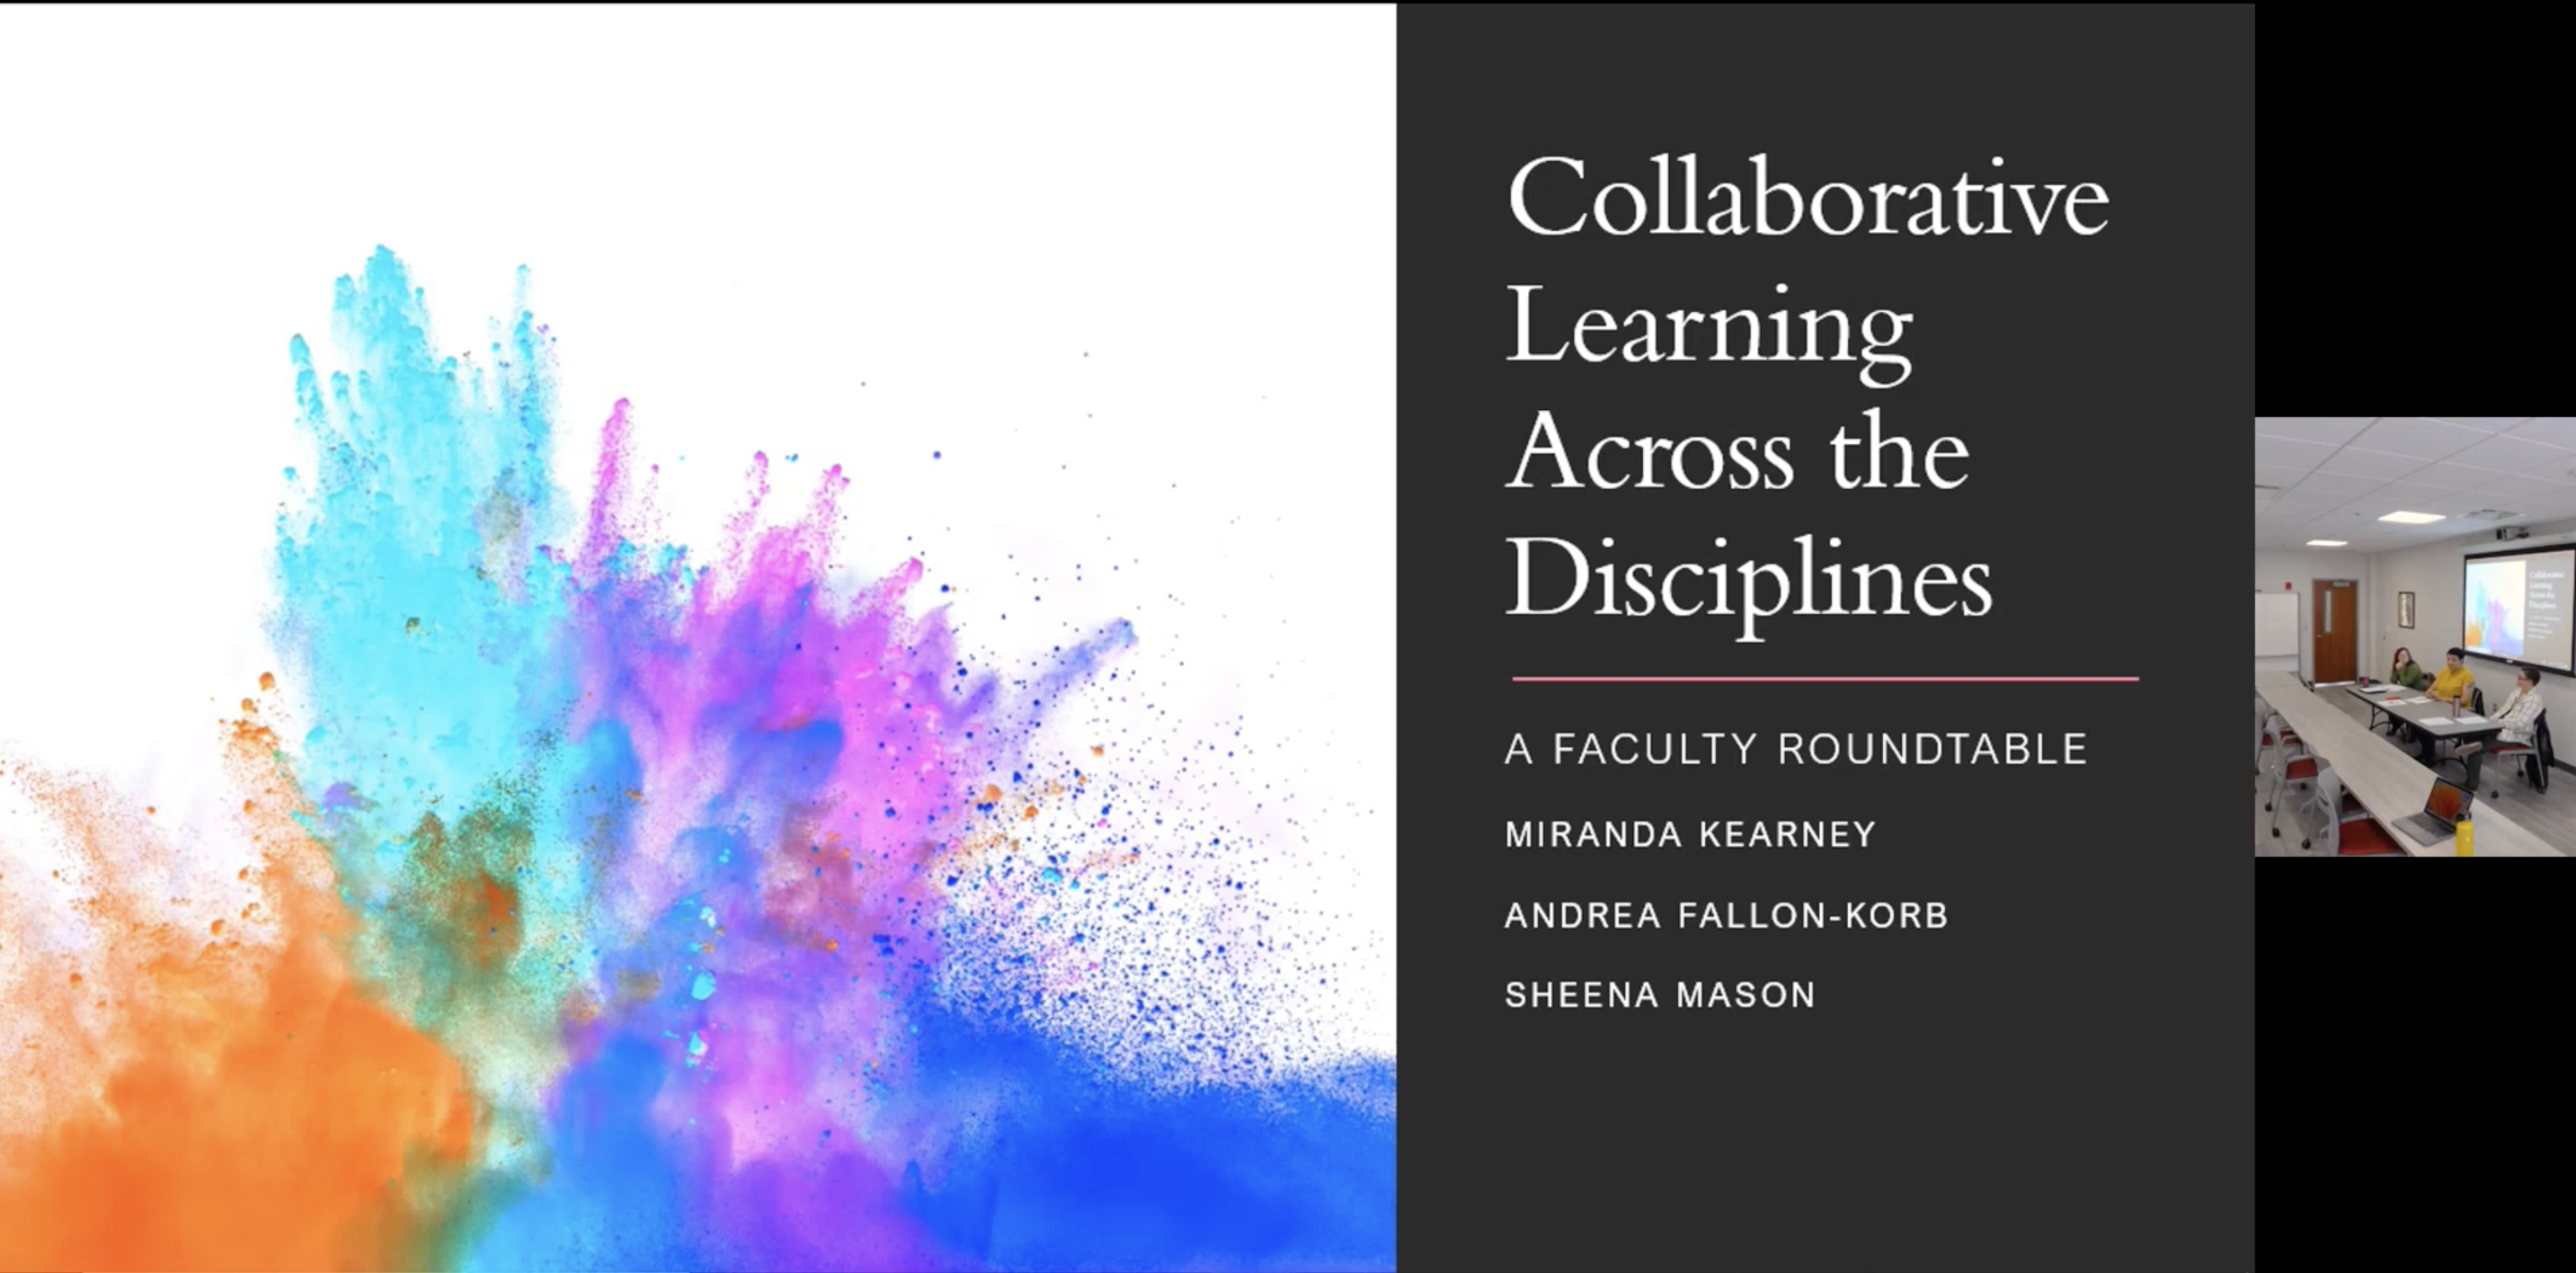 Title slide for PowerPoint presentation, Collaborative Learning Across the Disciplines, with small still of three session panelists.